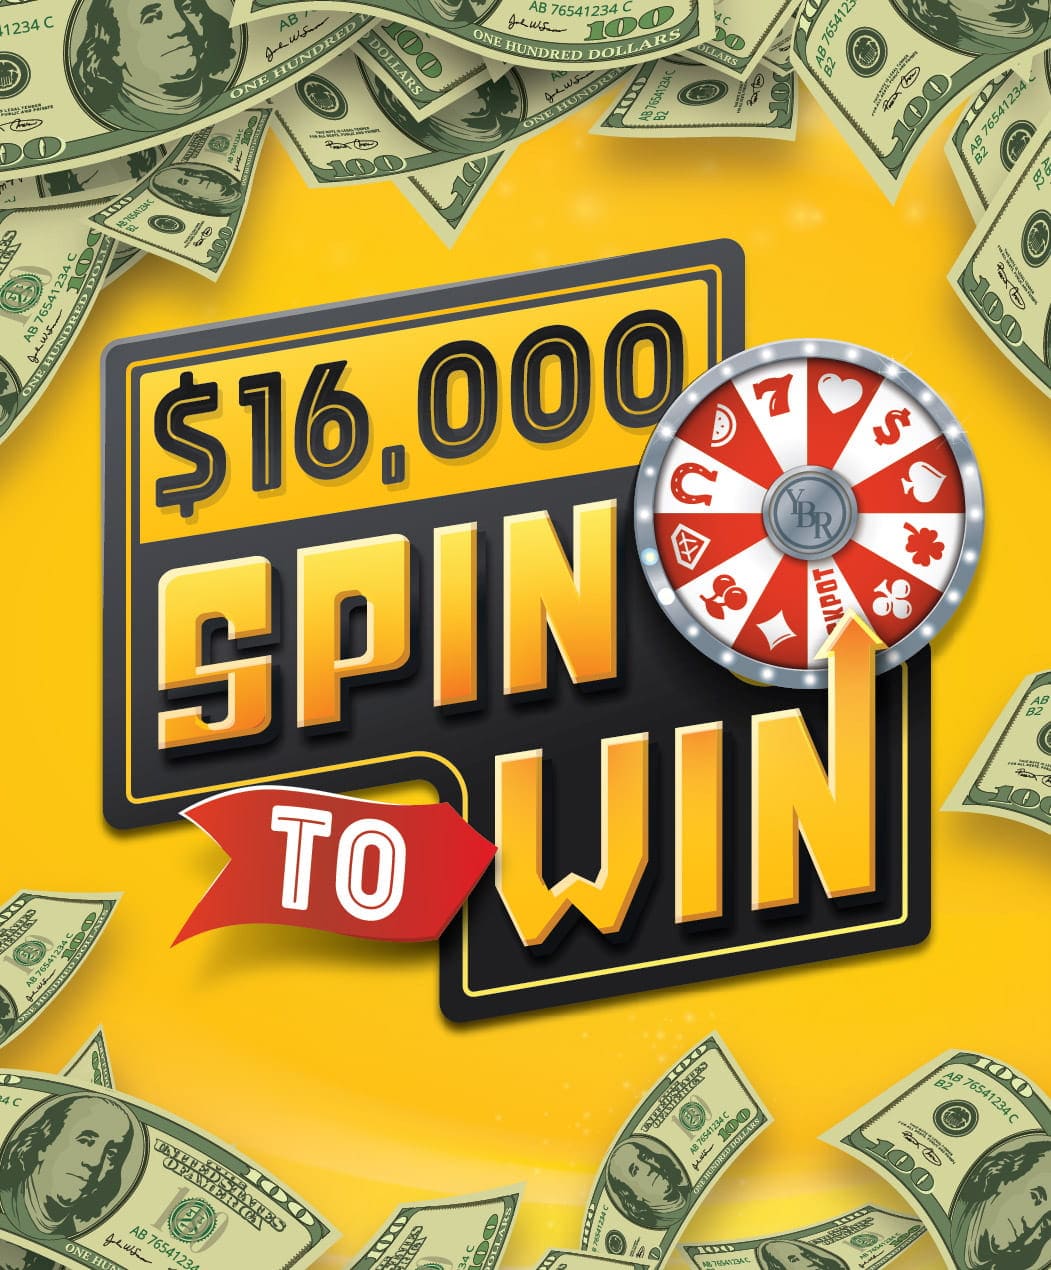 $16,000 Spin to Win